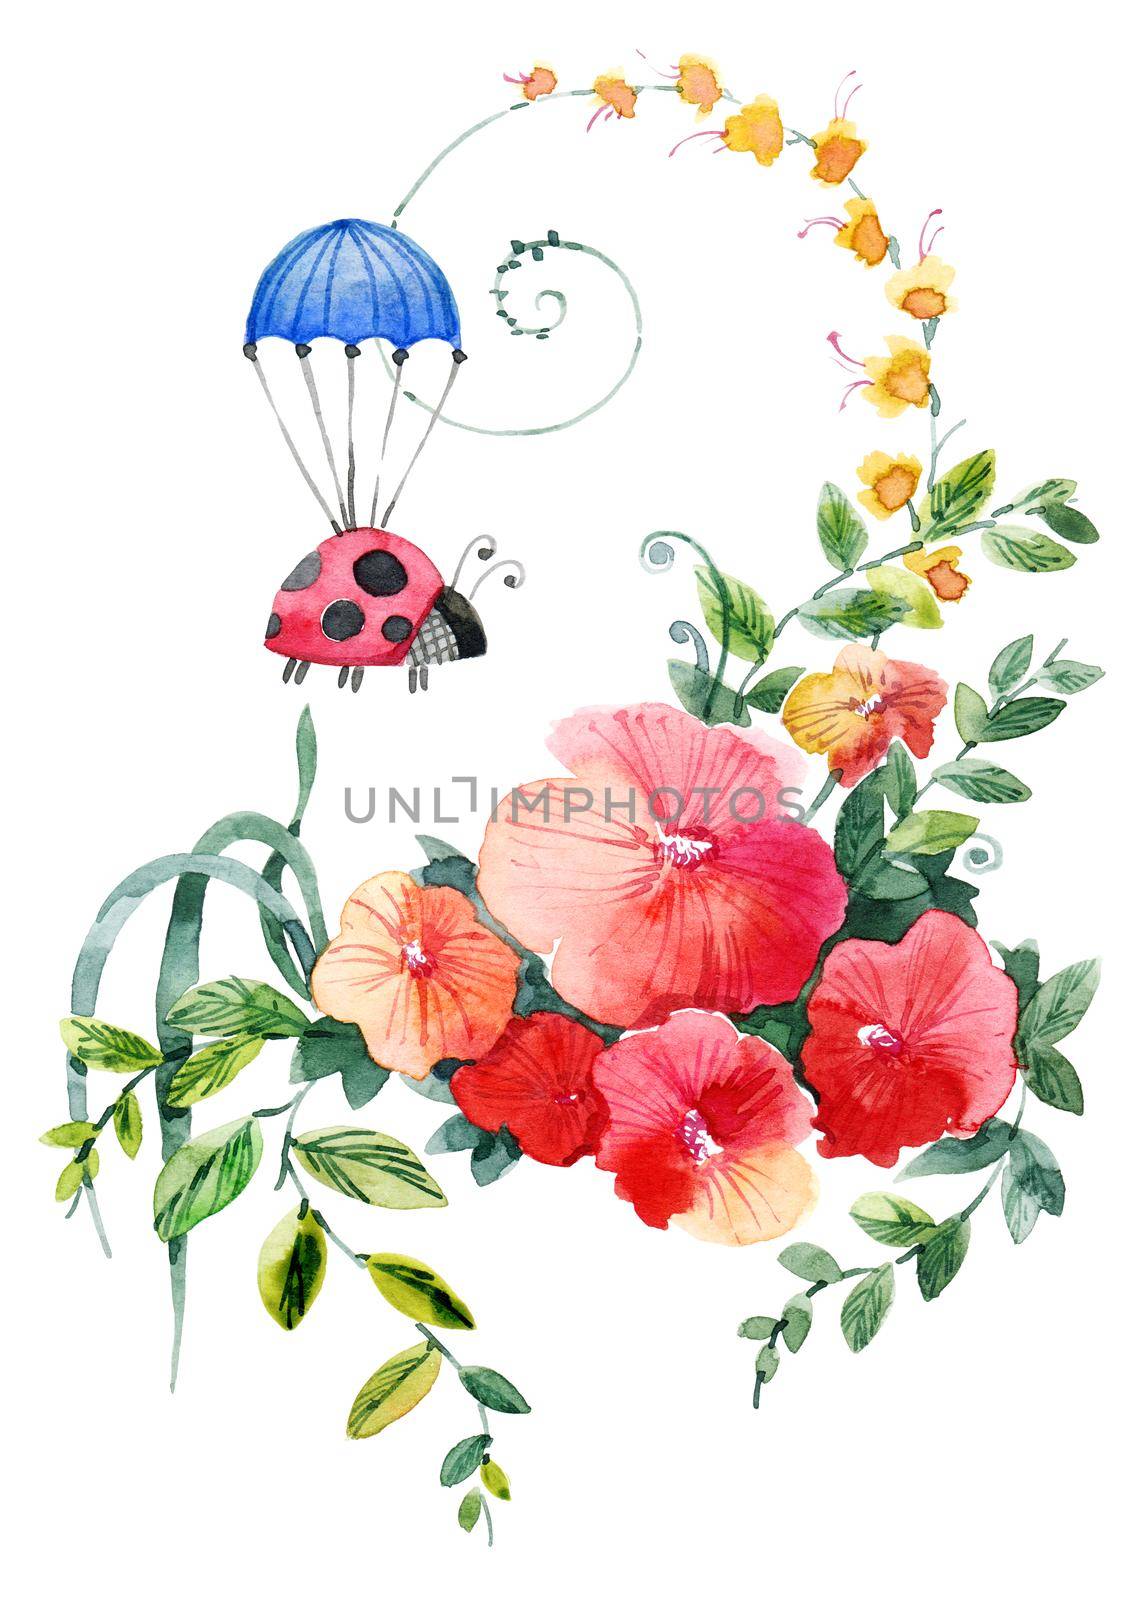 Cute illustration of flowers bouquet and ladybug flying on parachute. Design for greeting card. Drawing by watercolor.